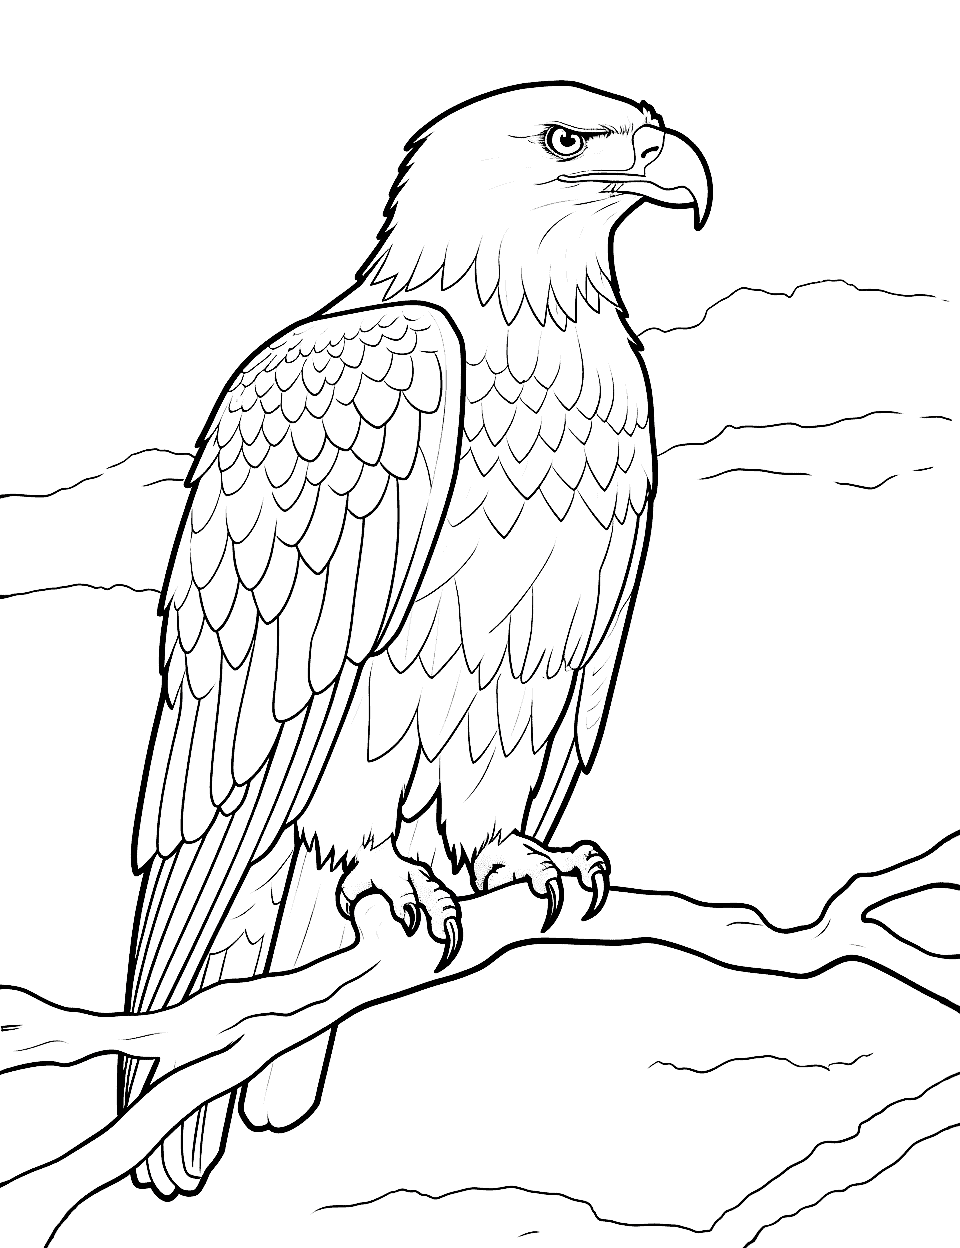 Wise Bald Eagle Animal Coloring Page - A bald eagle perched on a branch, observing its surroundings.